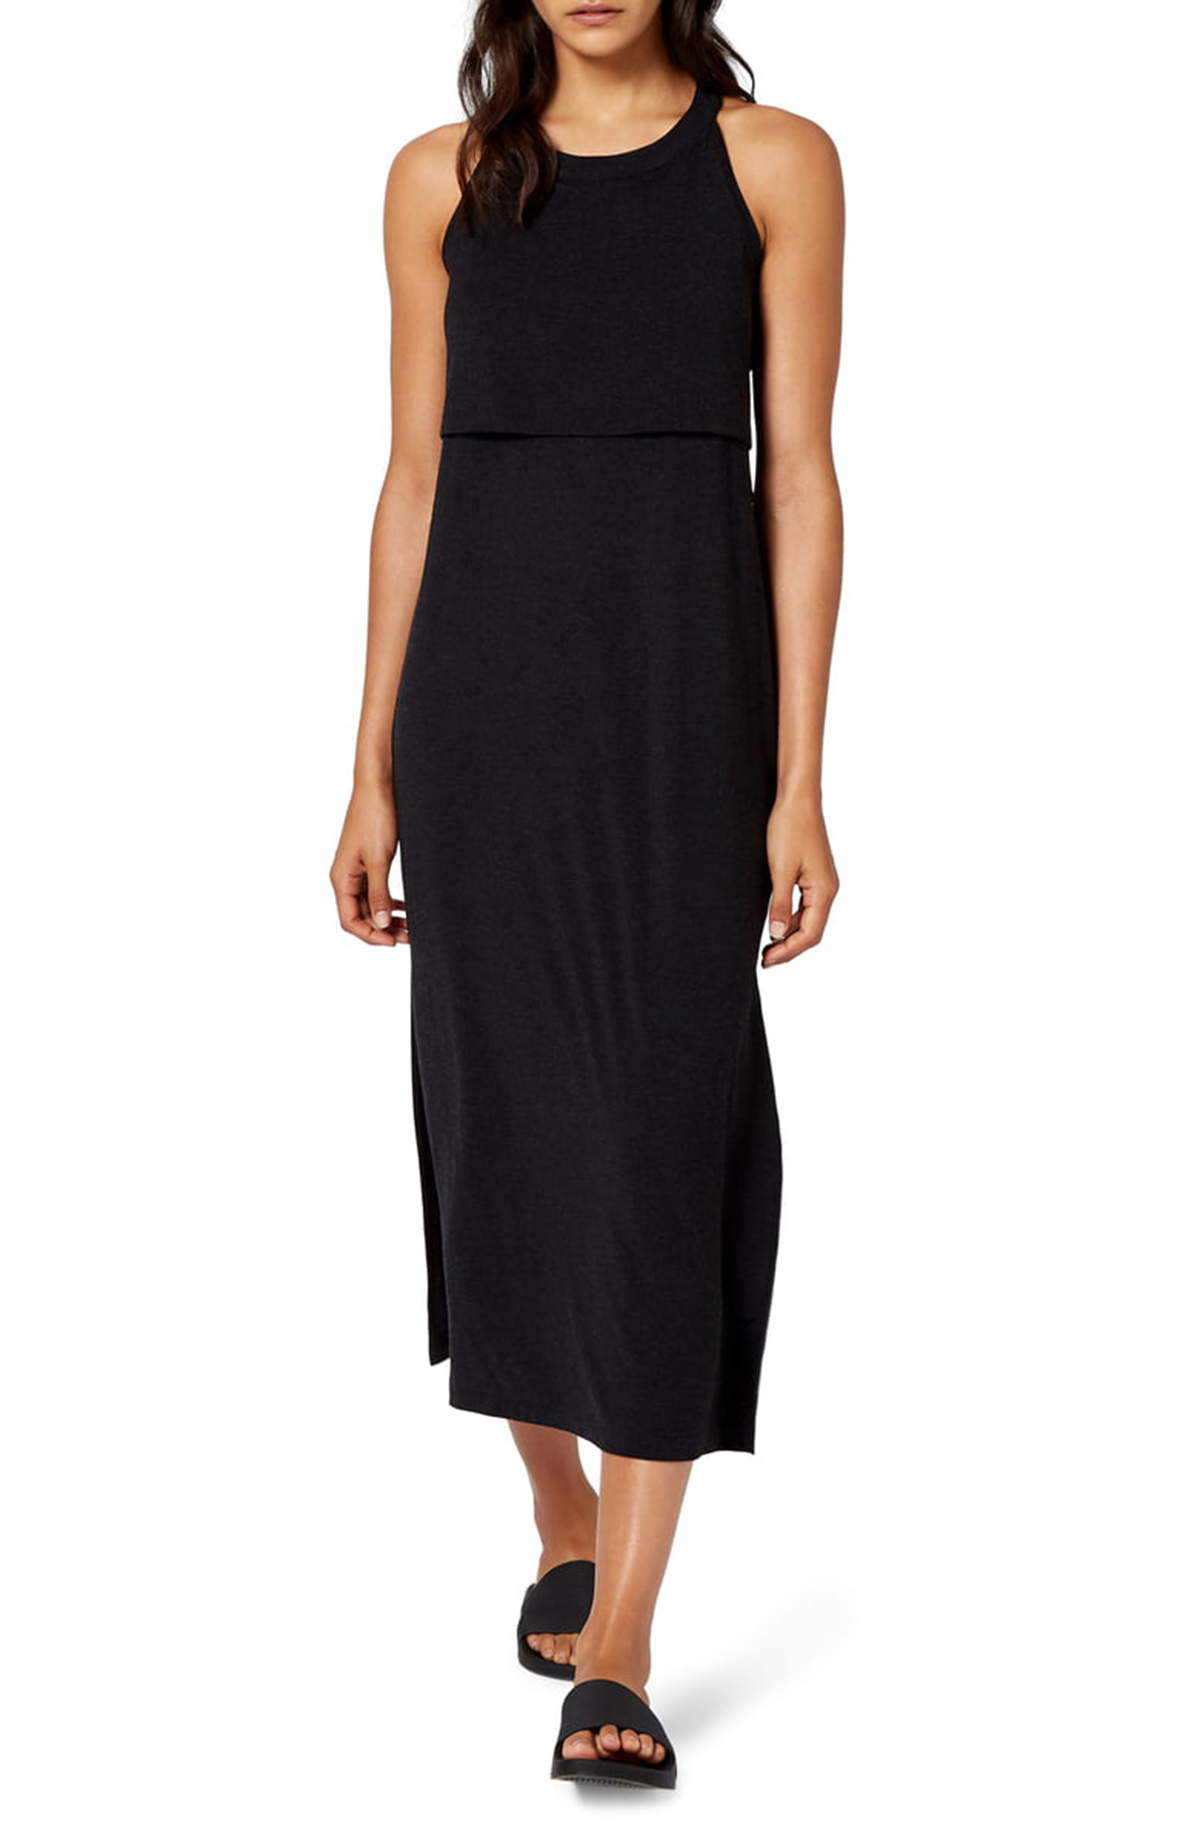 This Black Dress Masters the Art of Comfortable and Chic All at Once